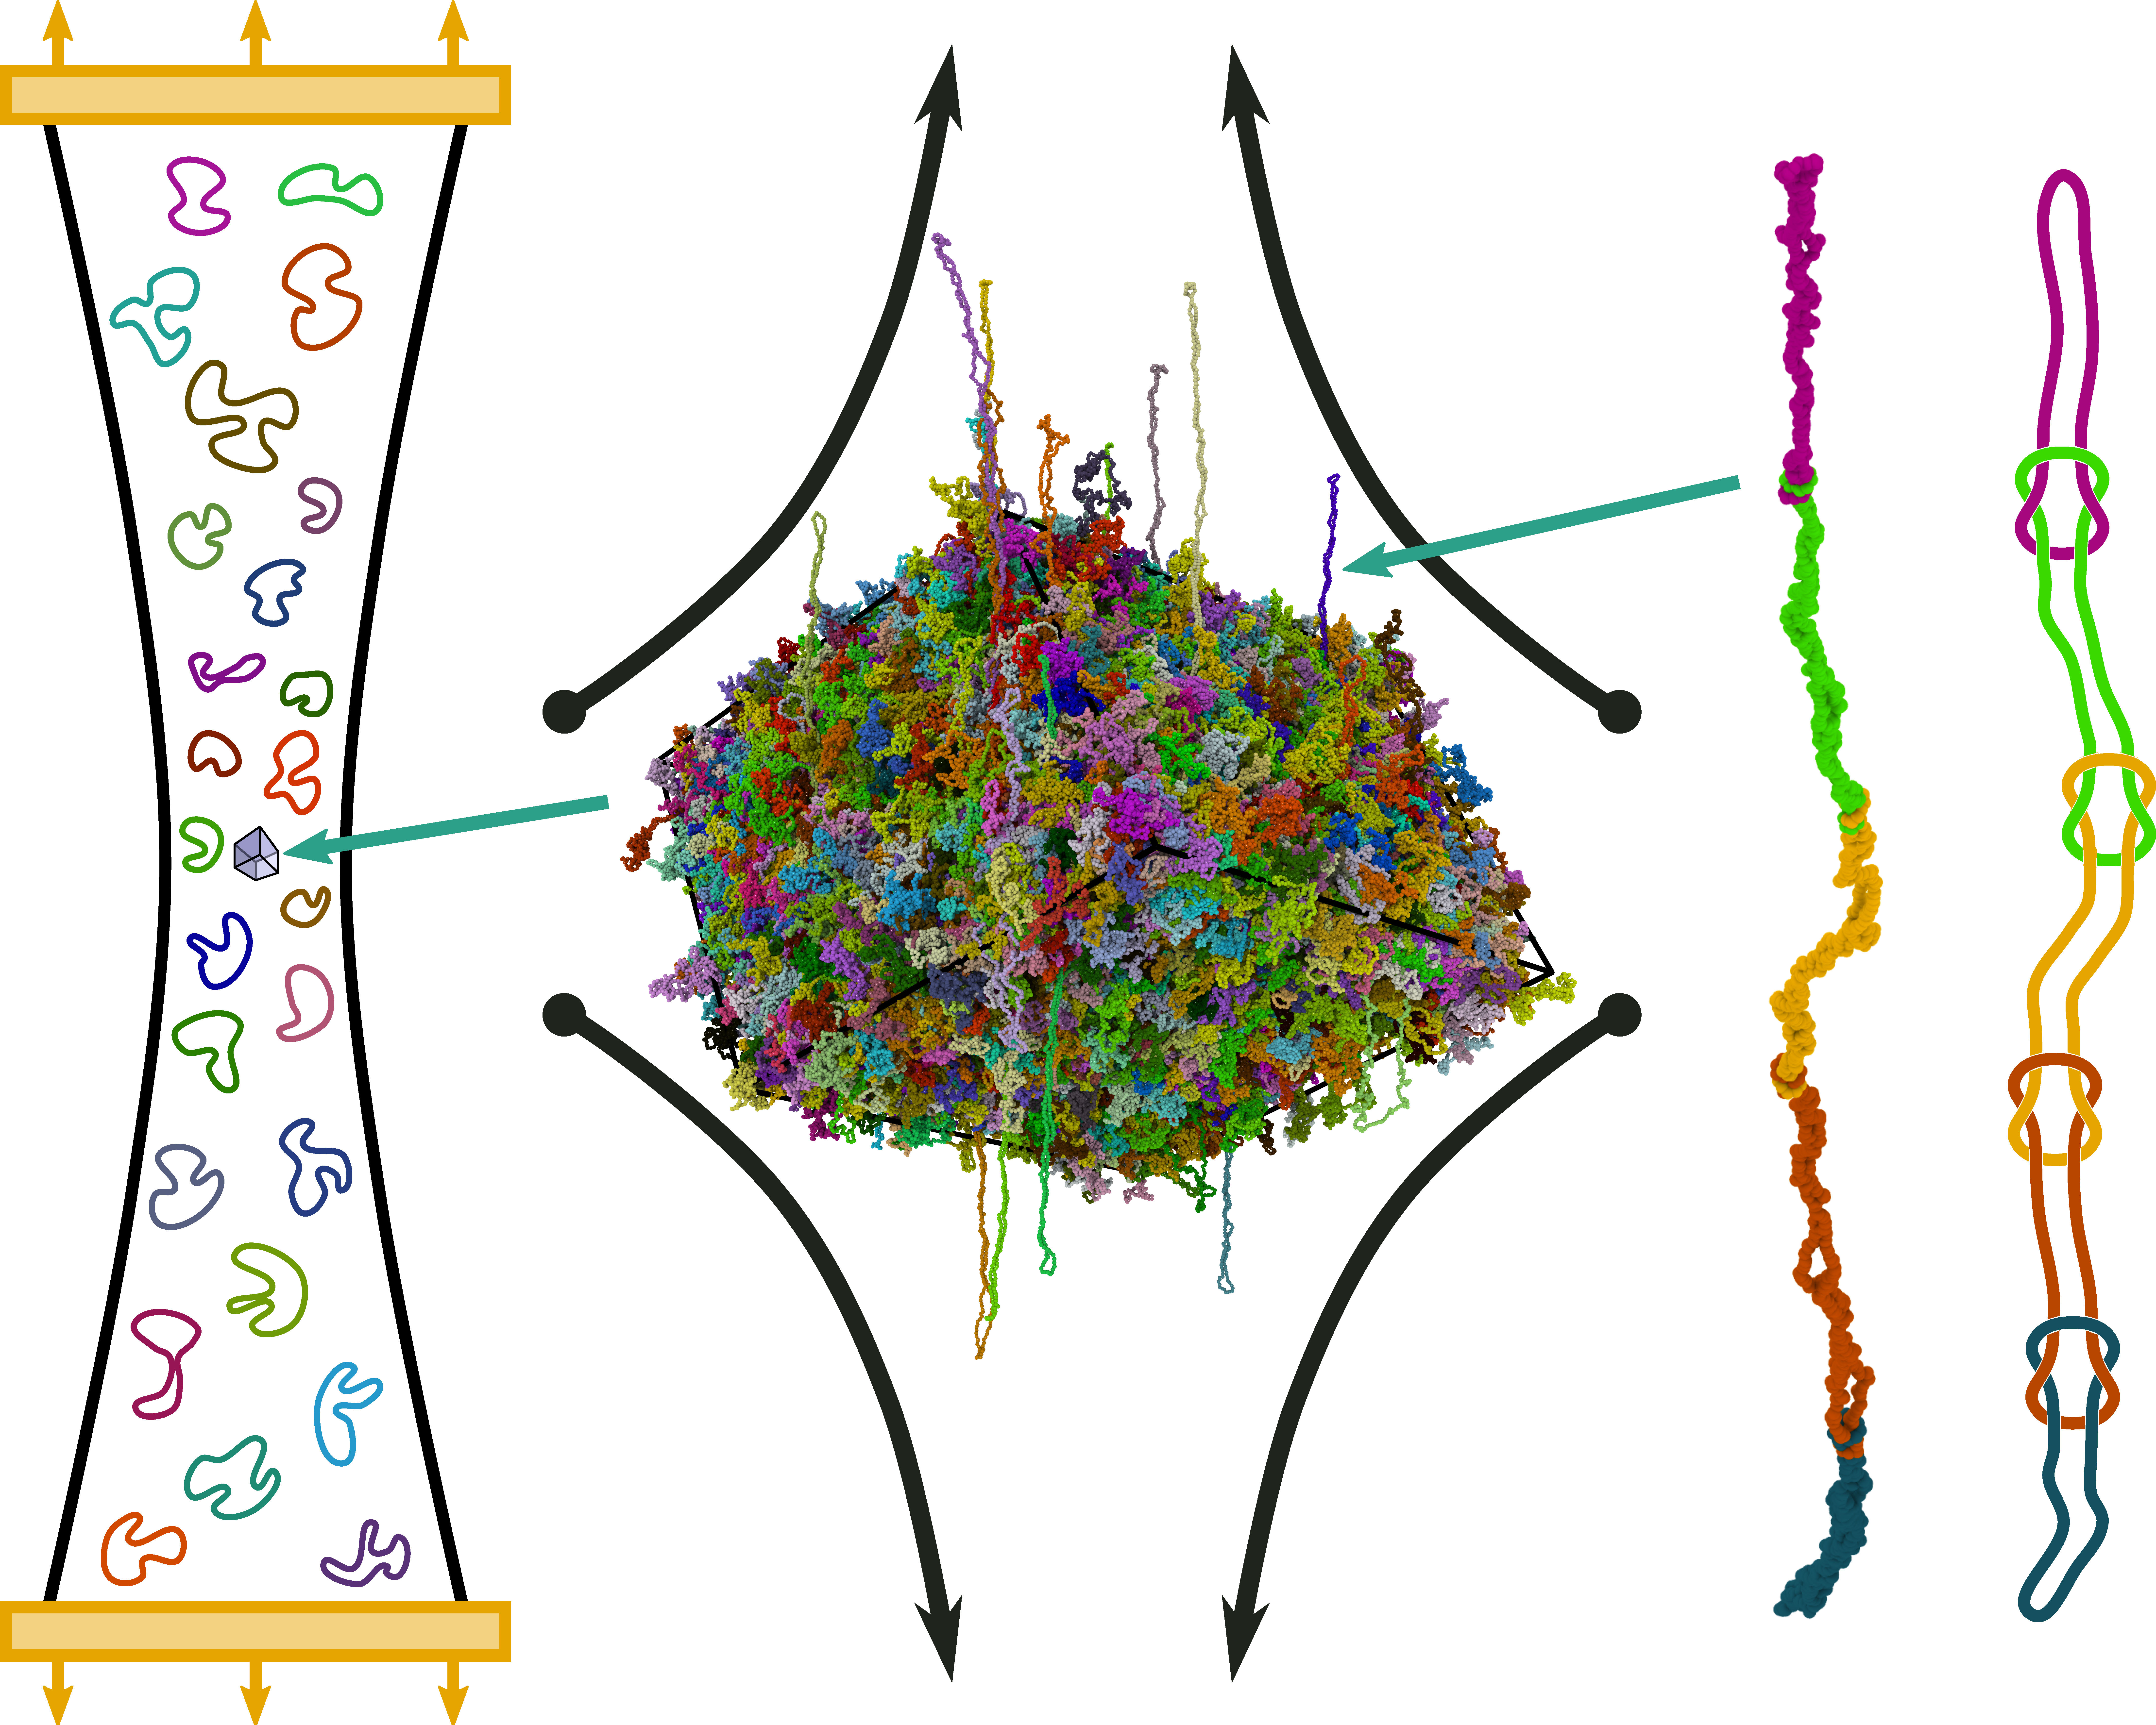 A tube of multicolored circle compressed in the center, followed by a burst of clumped particles being stretched, followed by a spectrum of particles in a thread, and lastly a spectrum of particles chained.